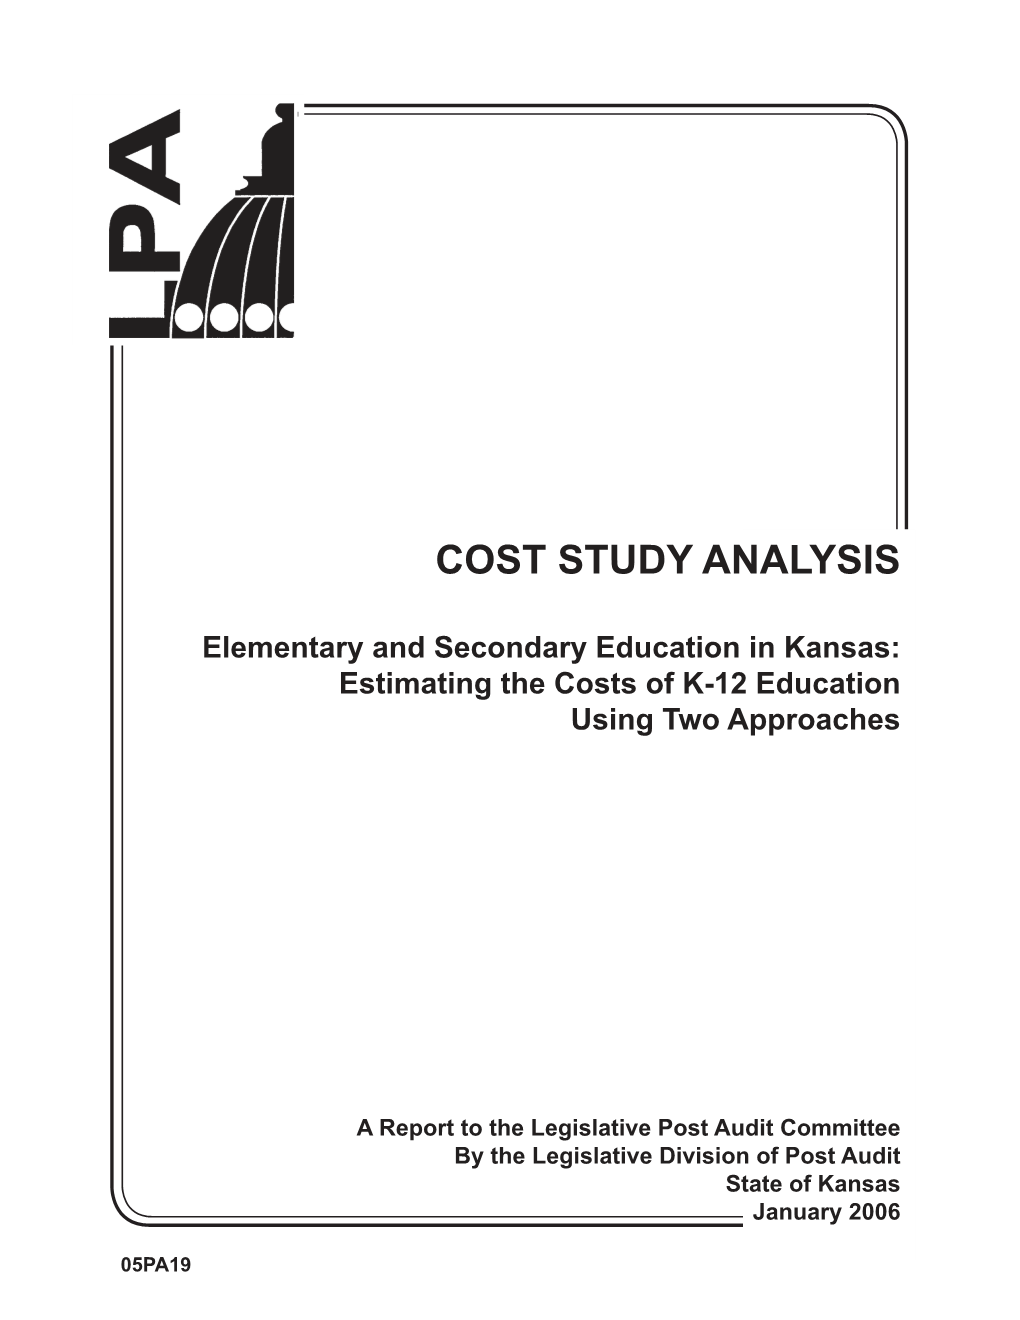 Elementary and Secondary Education in Kansas: Estimating the Costs of K-12 Education Using Two Approaches